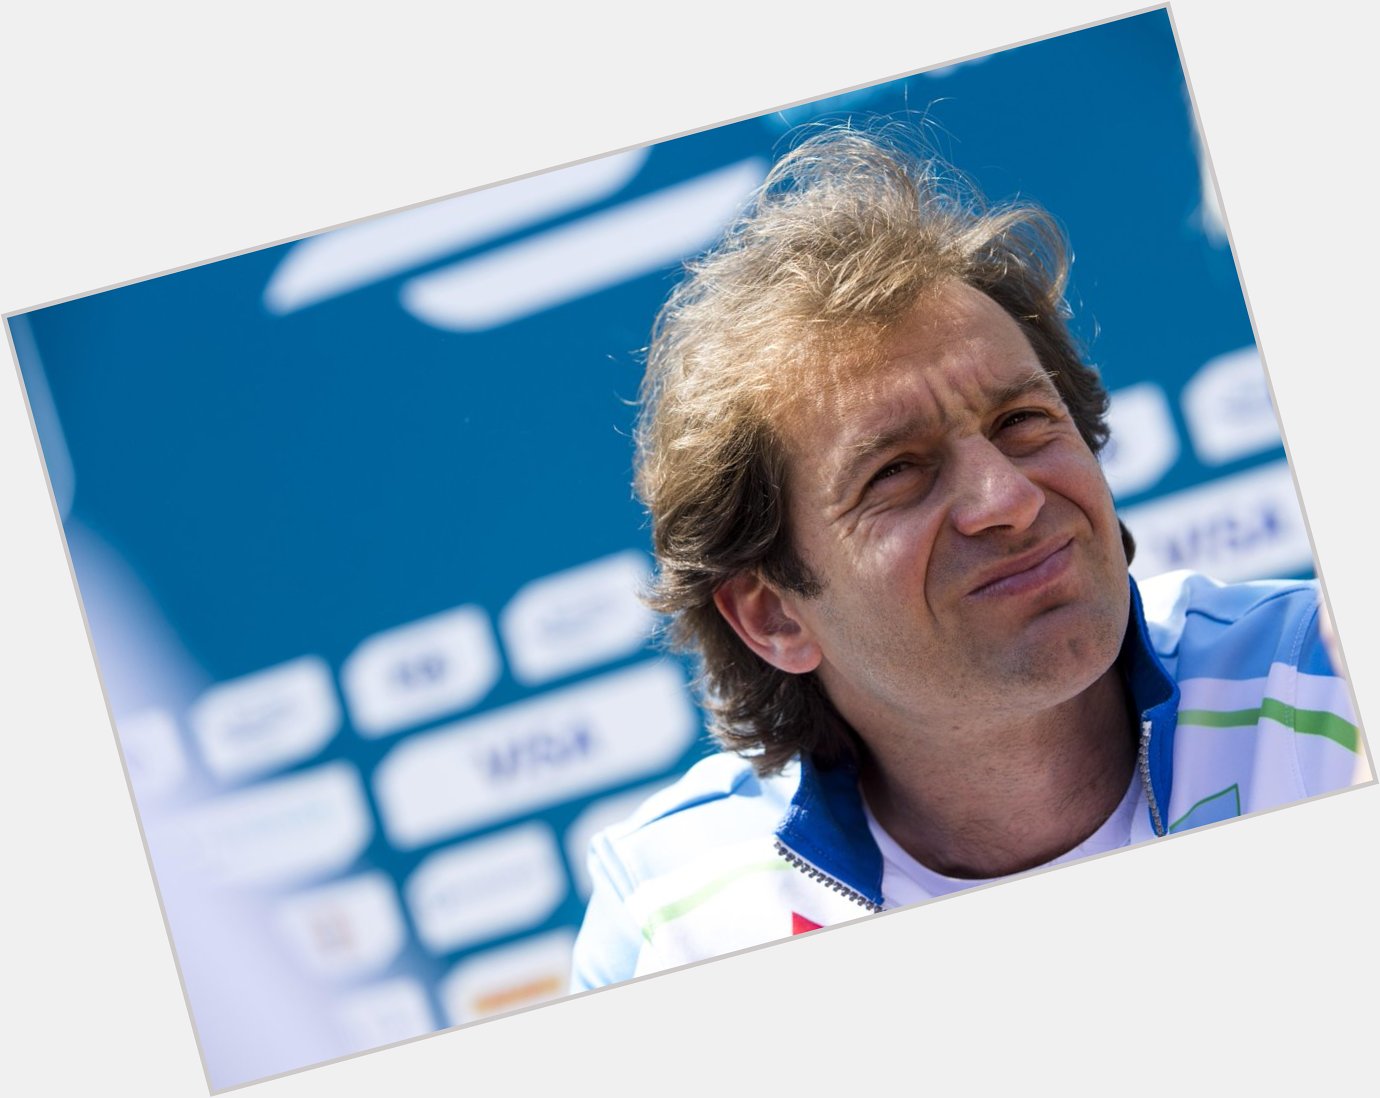 Wishing a very happy birthday to Formula E\s only owner/driver Jarno Trulli! 